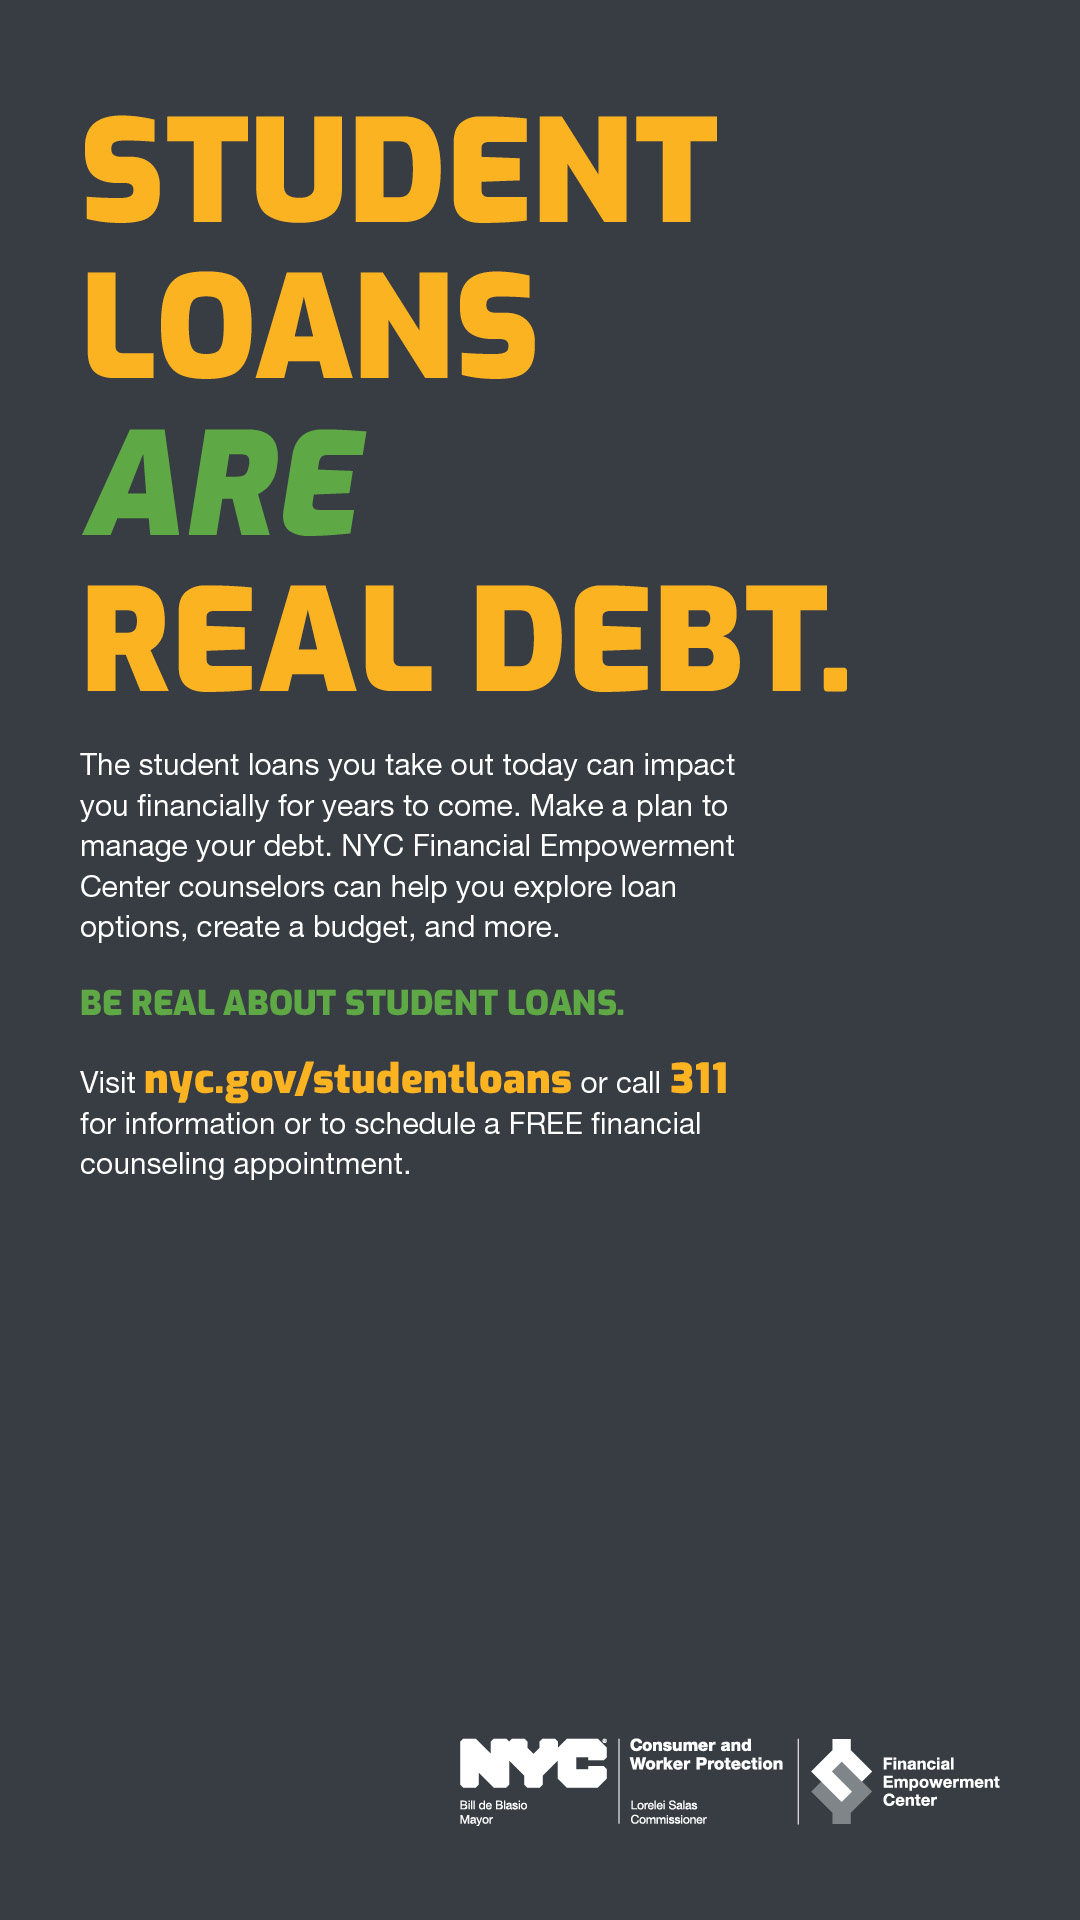 Ad with text STUDENT LOANS ARE REAL DEBT